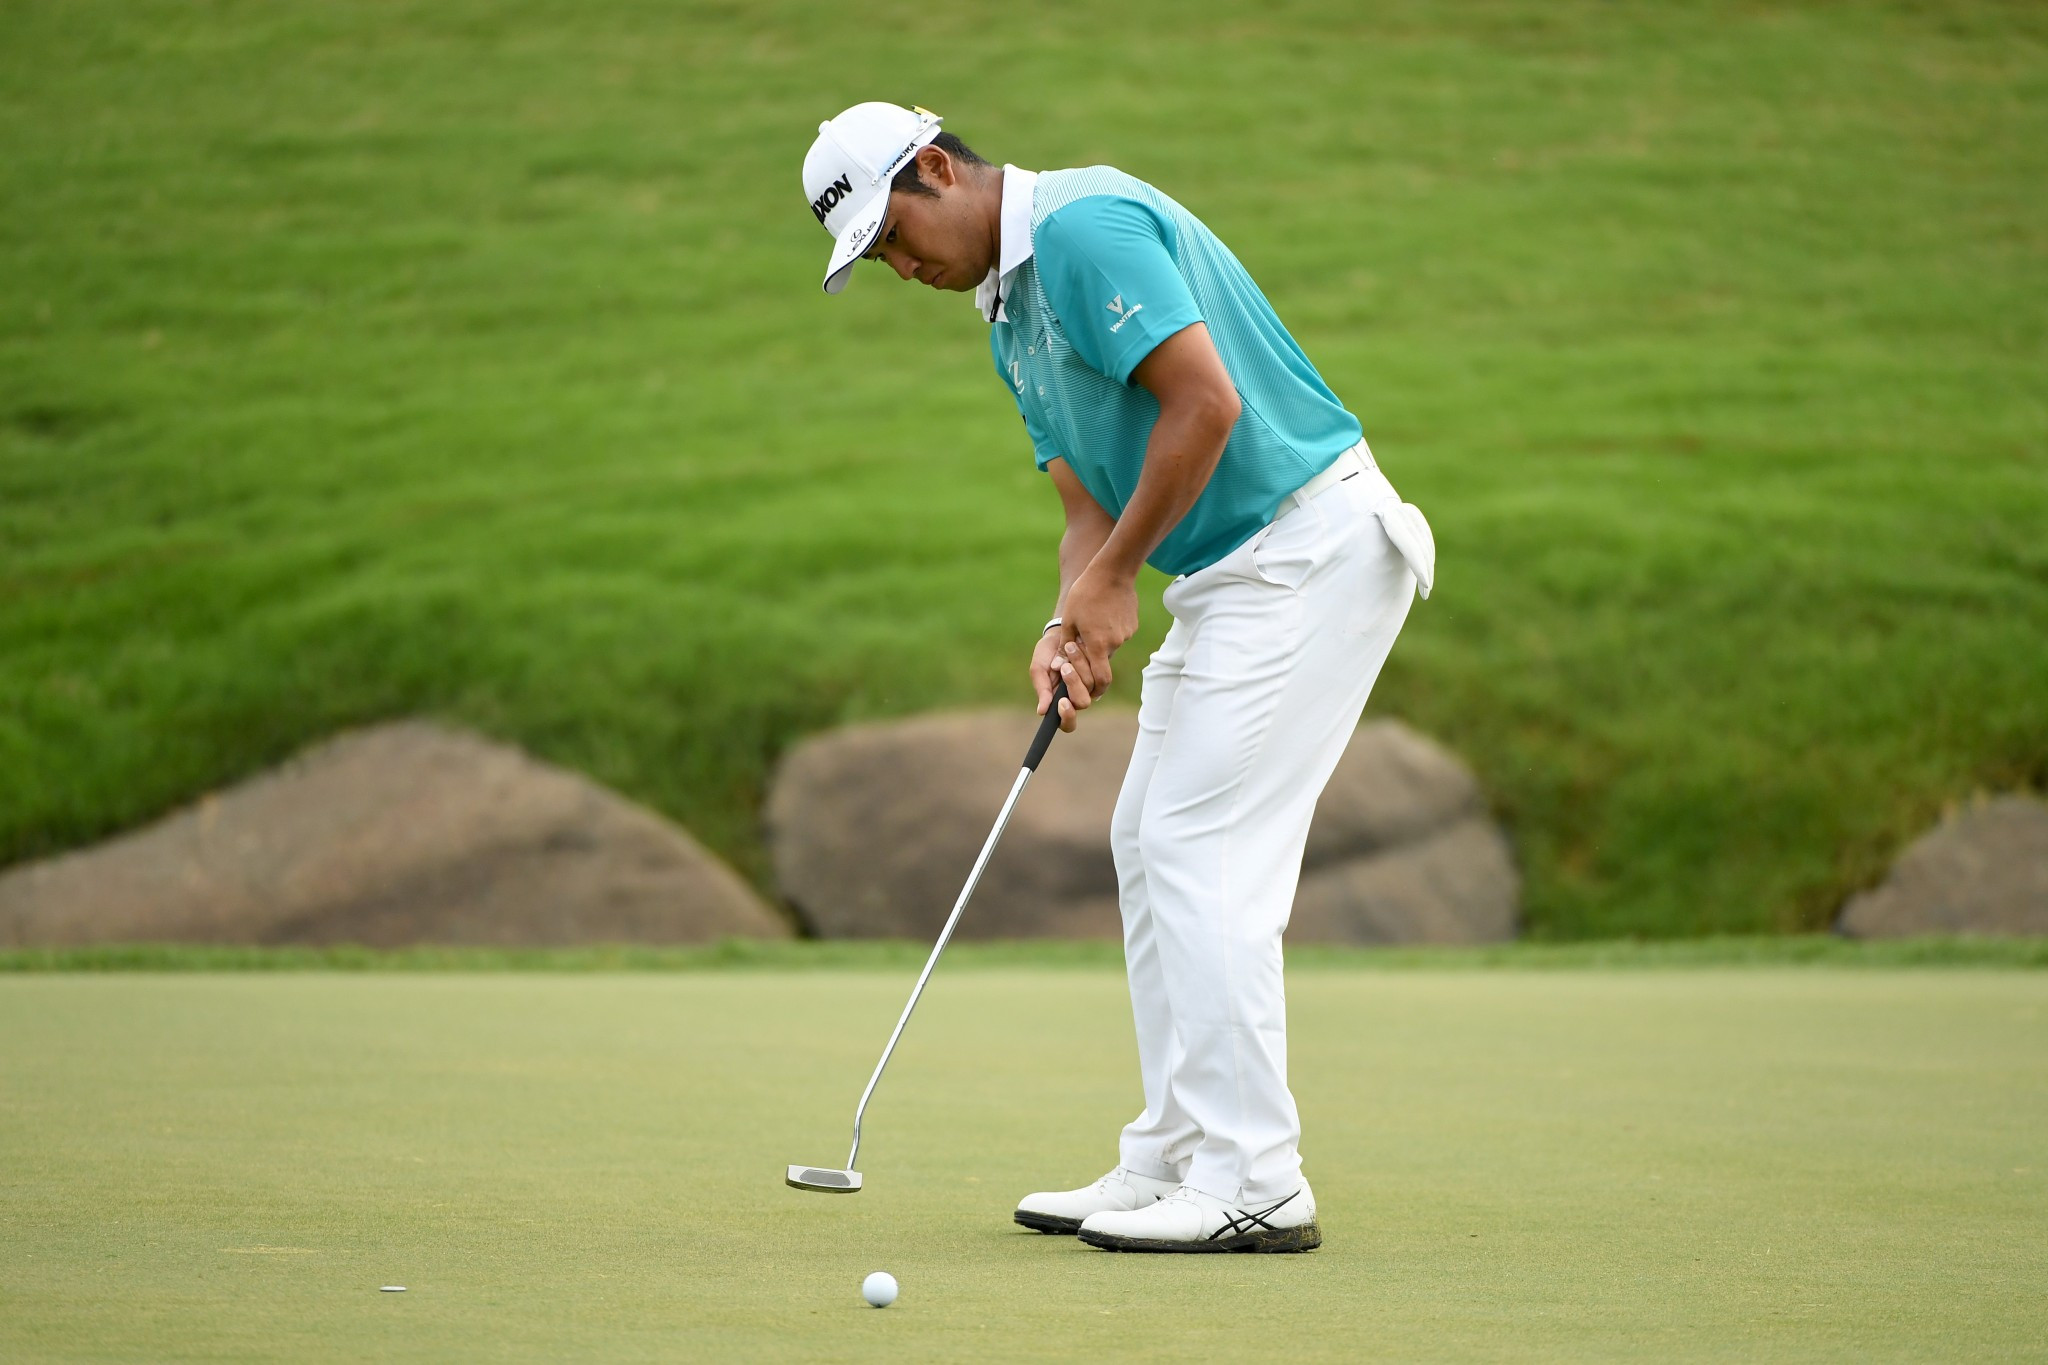 Hideki Matsuyama carded a round of 64 to move into joint first place at the PGA Championship ©Getty Images